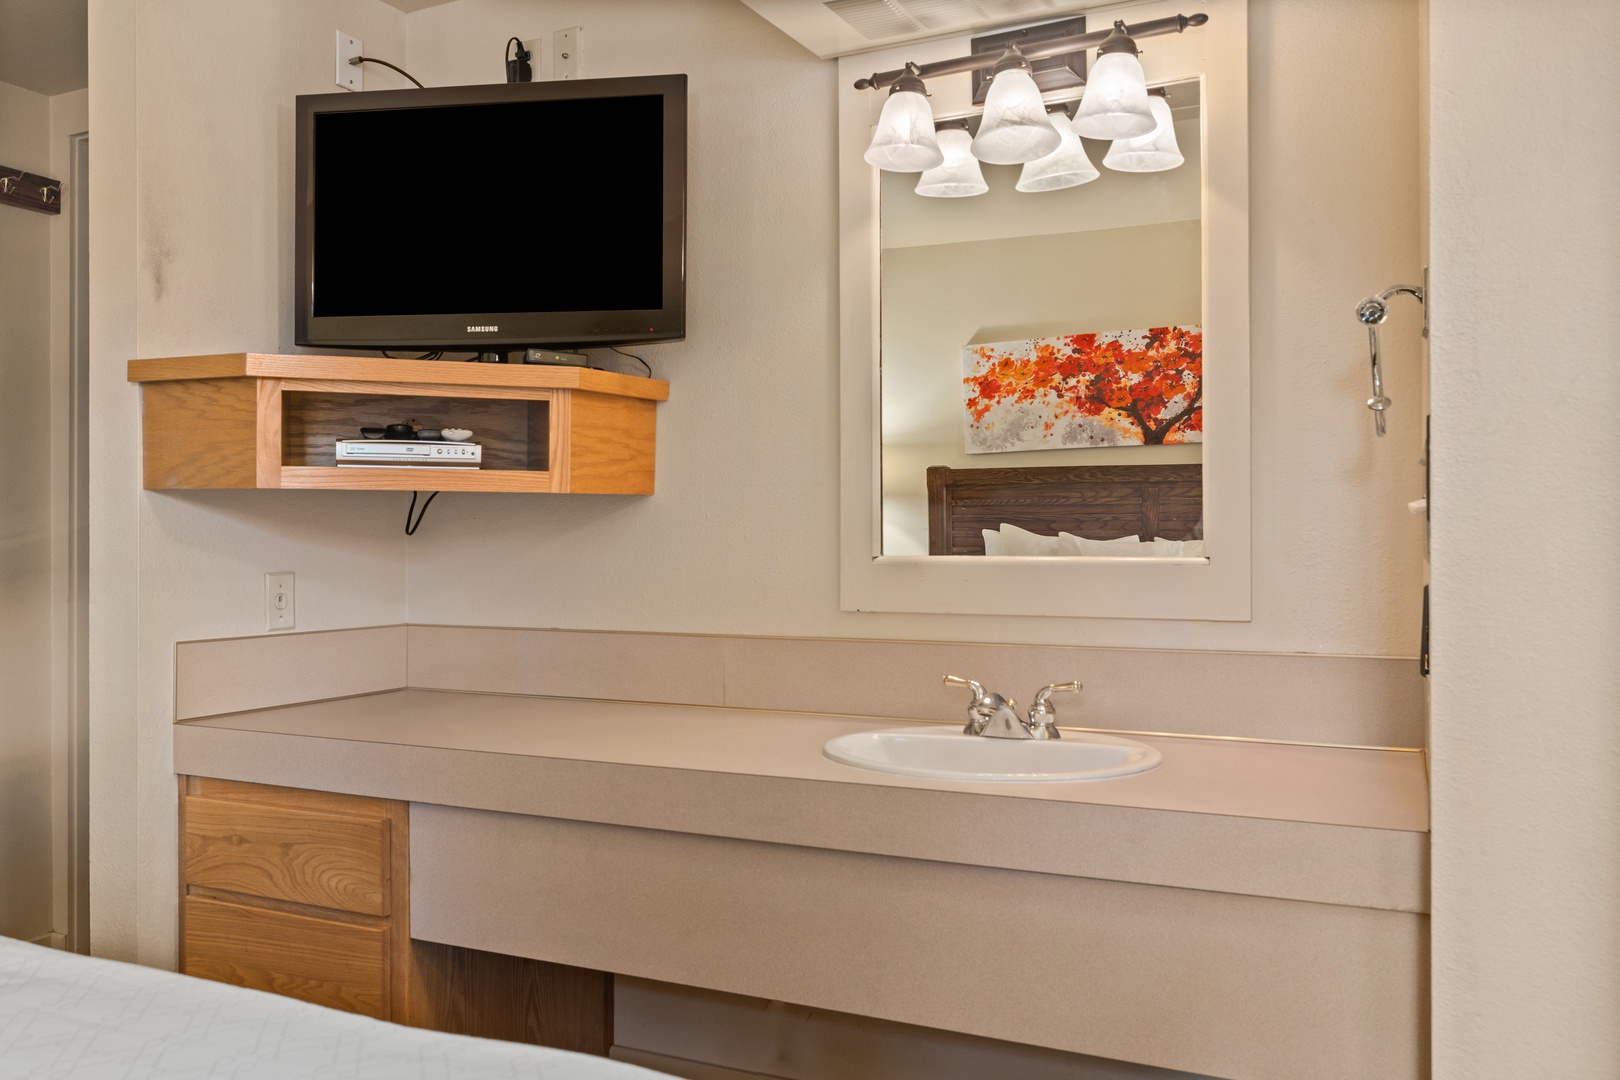 The master en suite includes an oversized single vanity & shower/tub combo